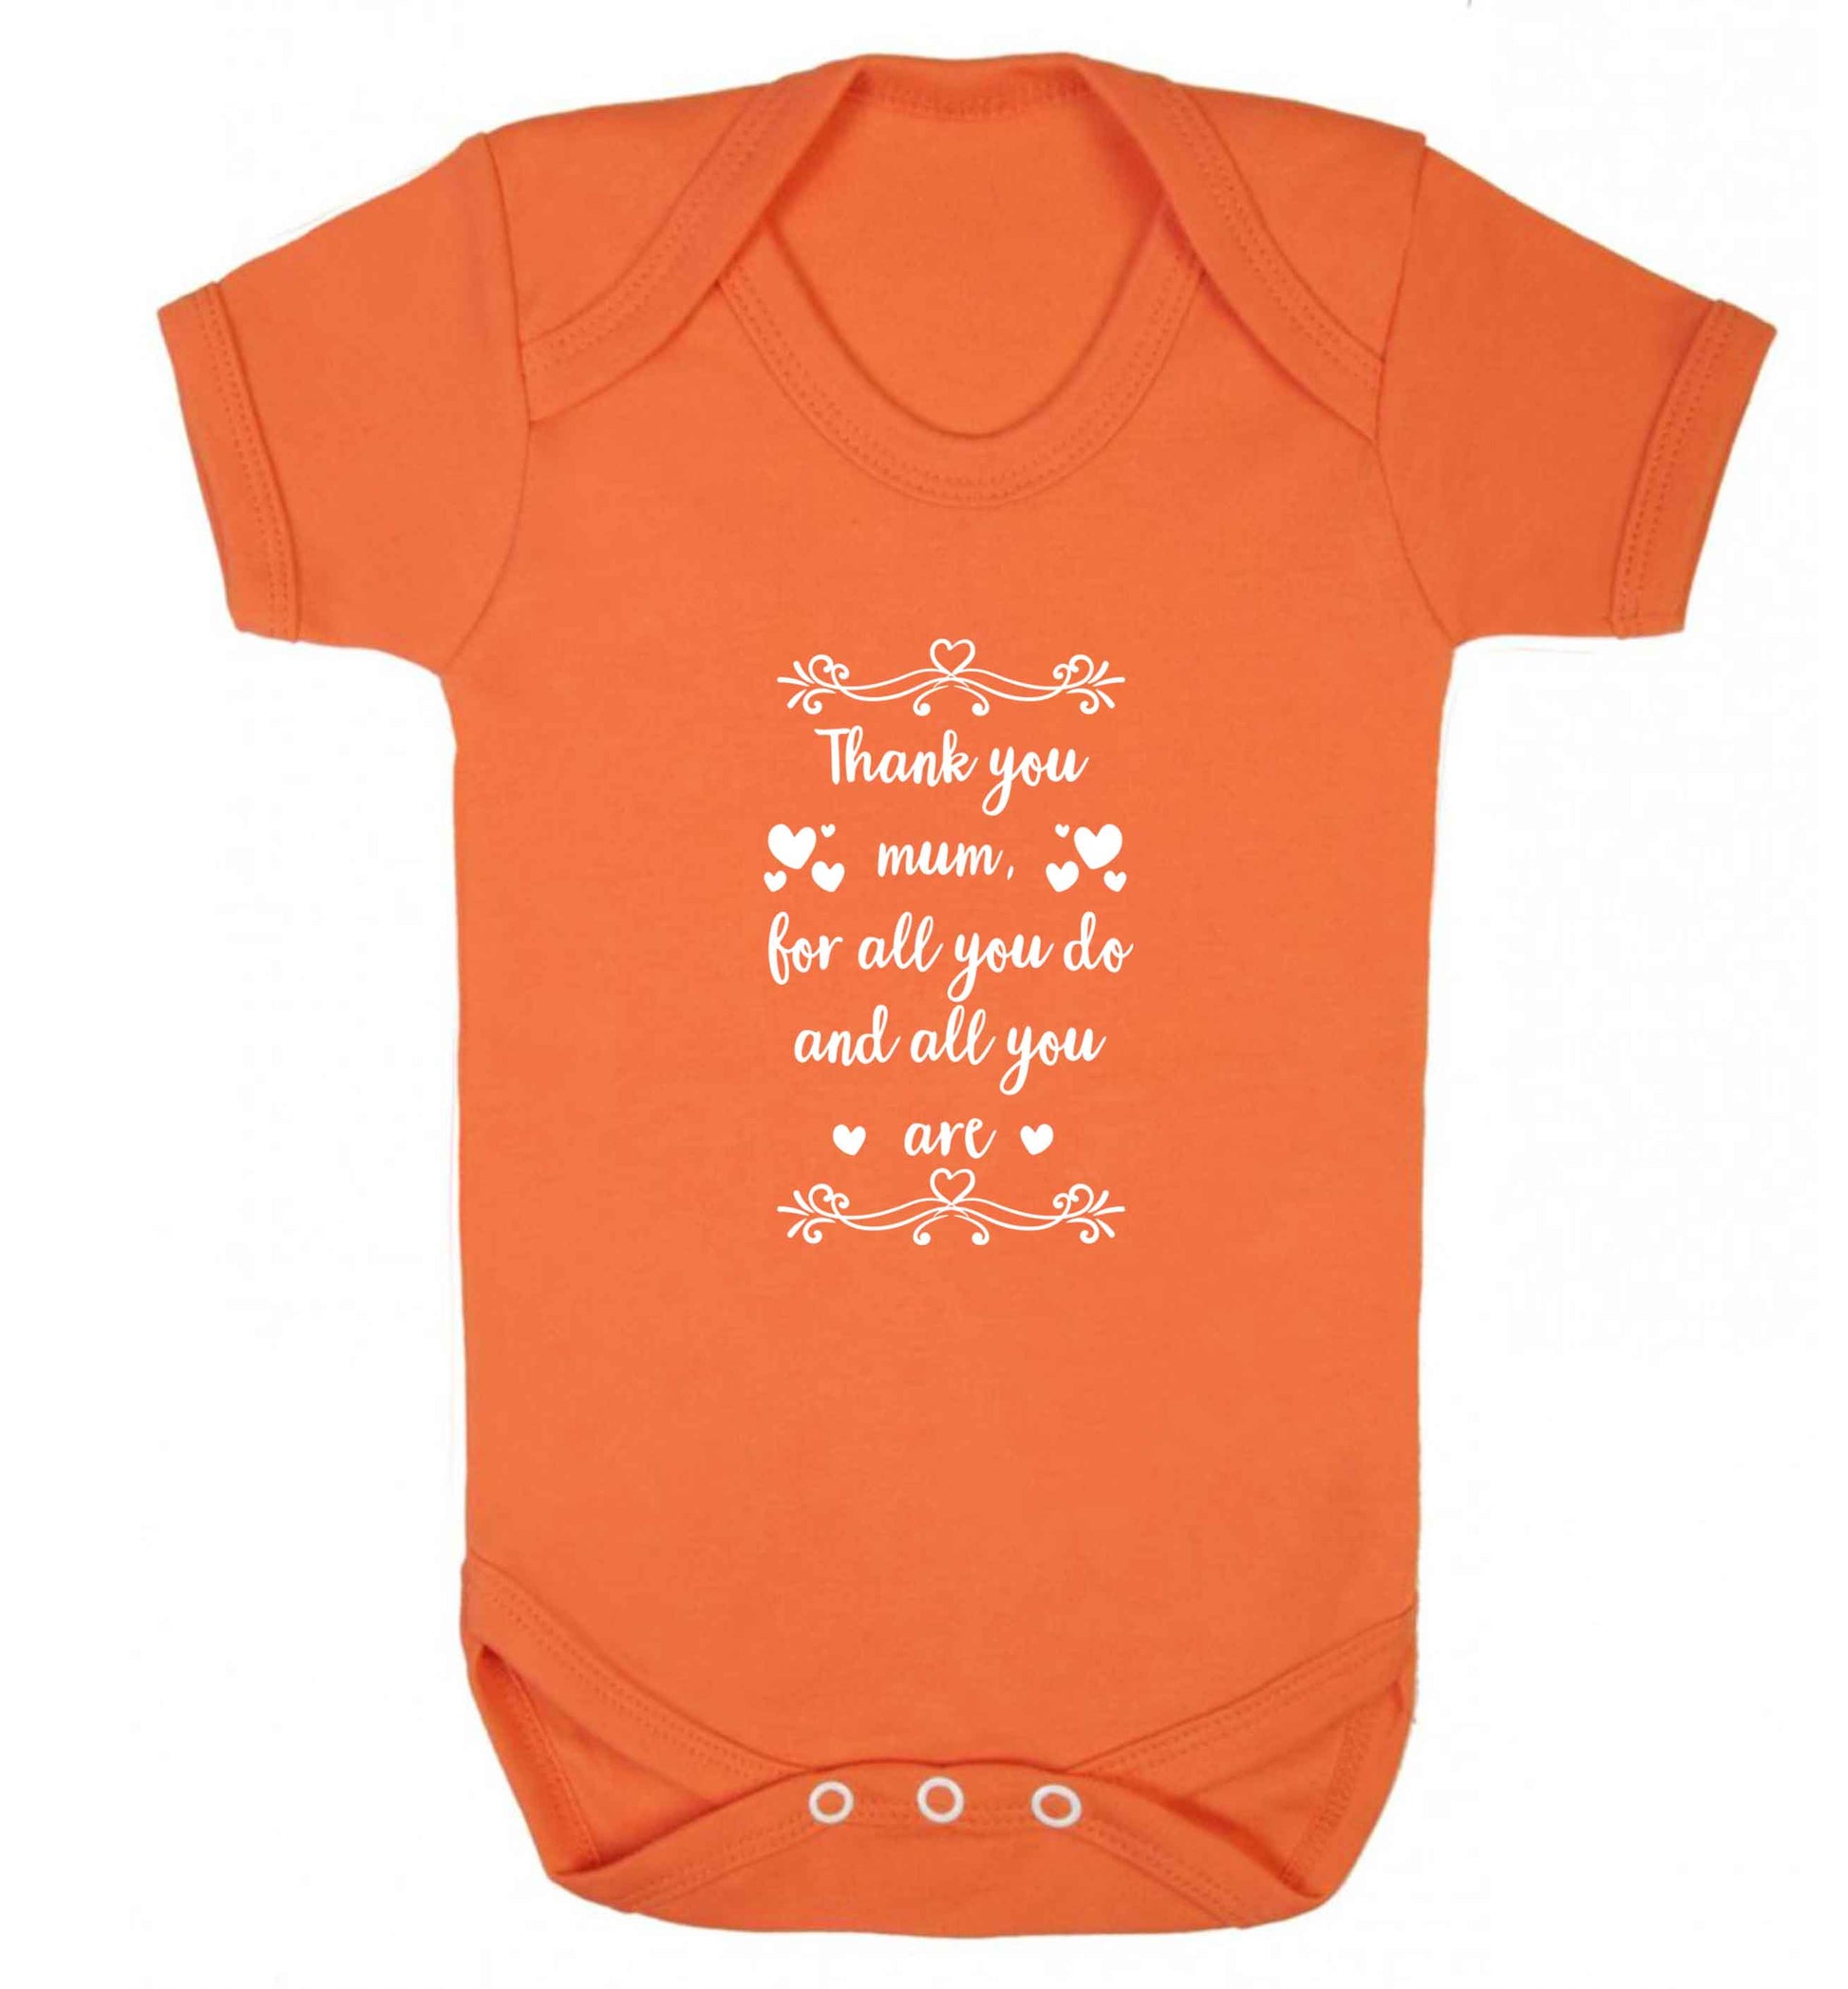 Gorgeous gifts for mums on mother's day! Thank you mum for all you do and all you are baby vest orange 18-24 months